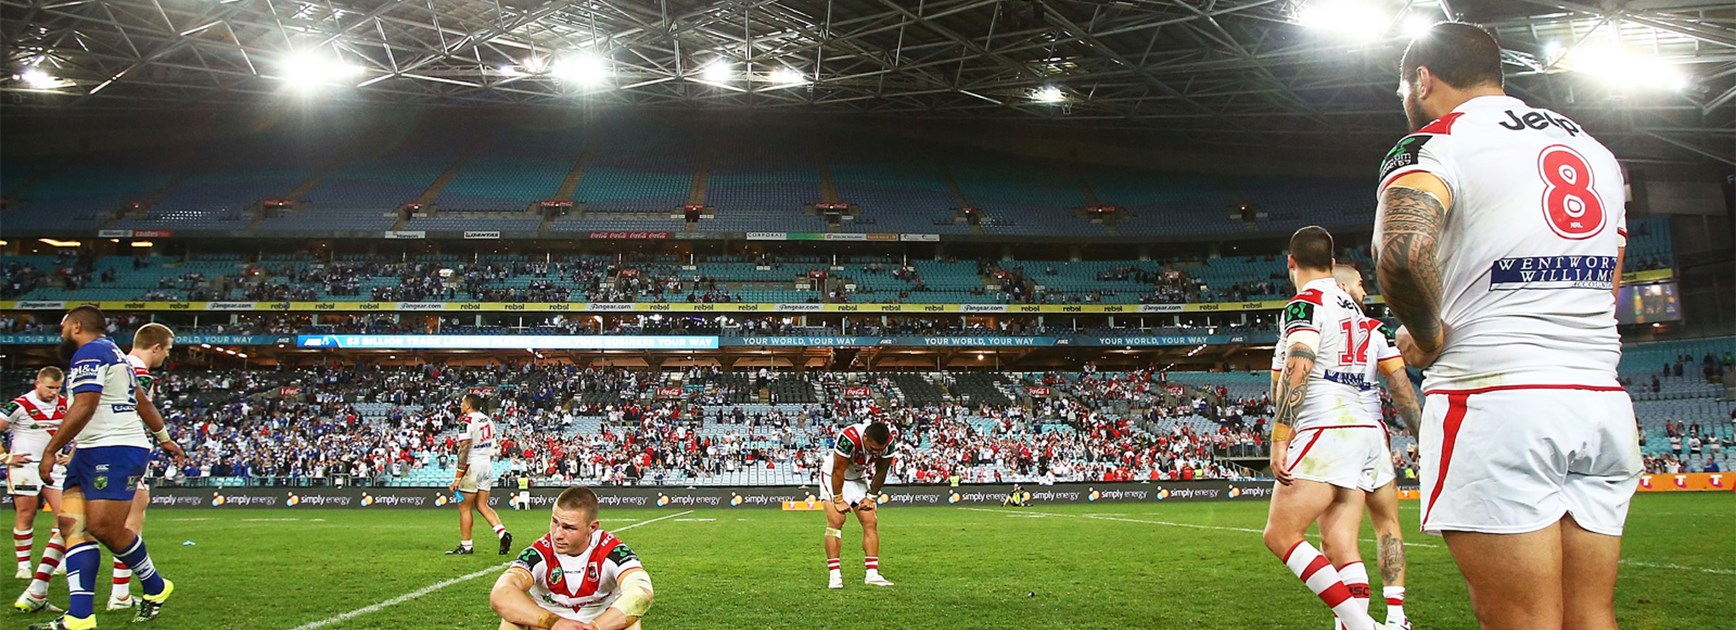 The dejected Dragons after their golden point defeat against the Bulldogs.